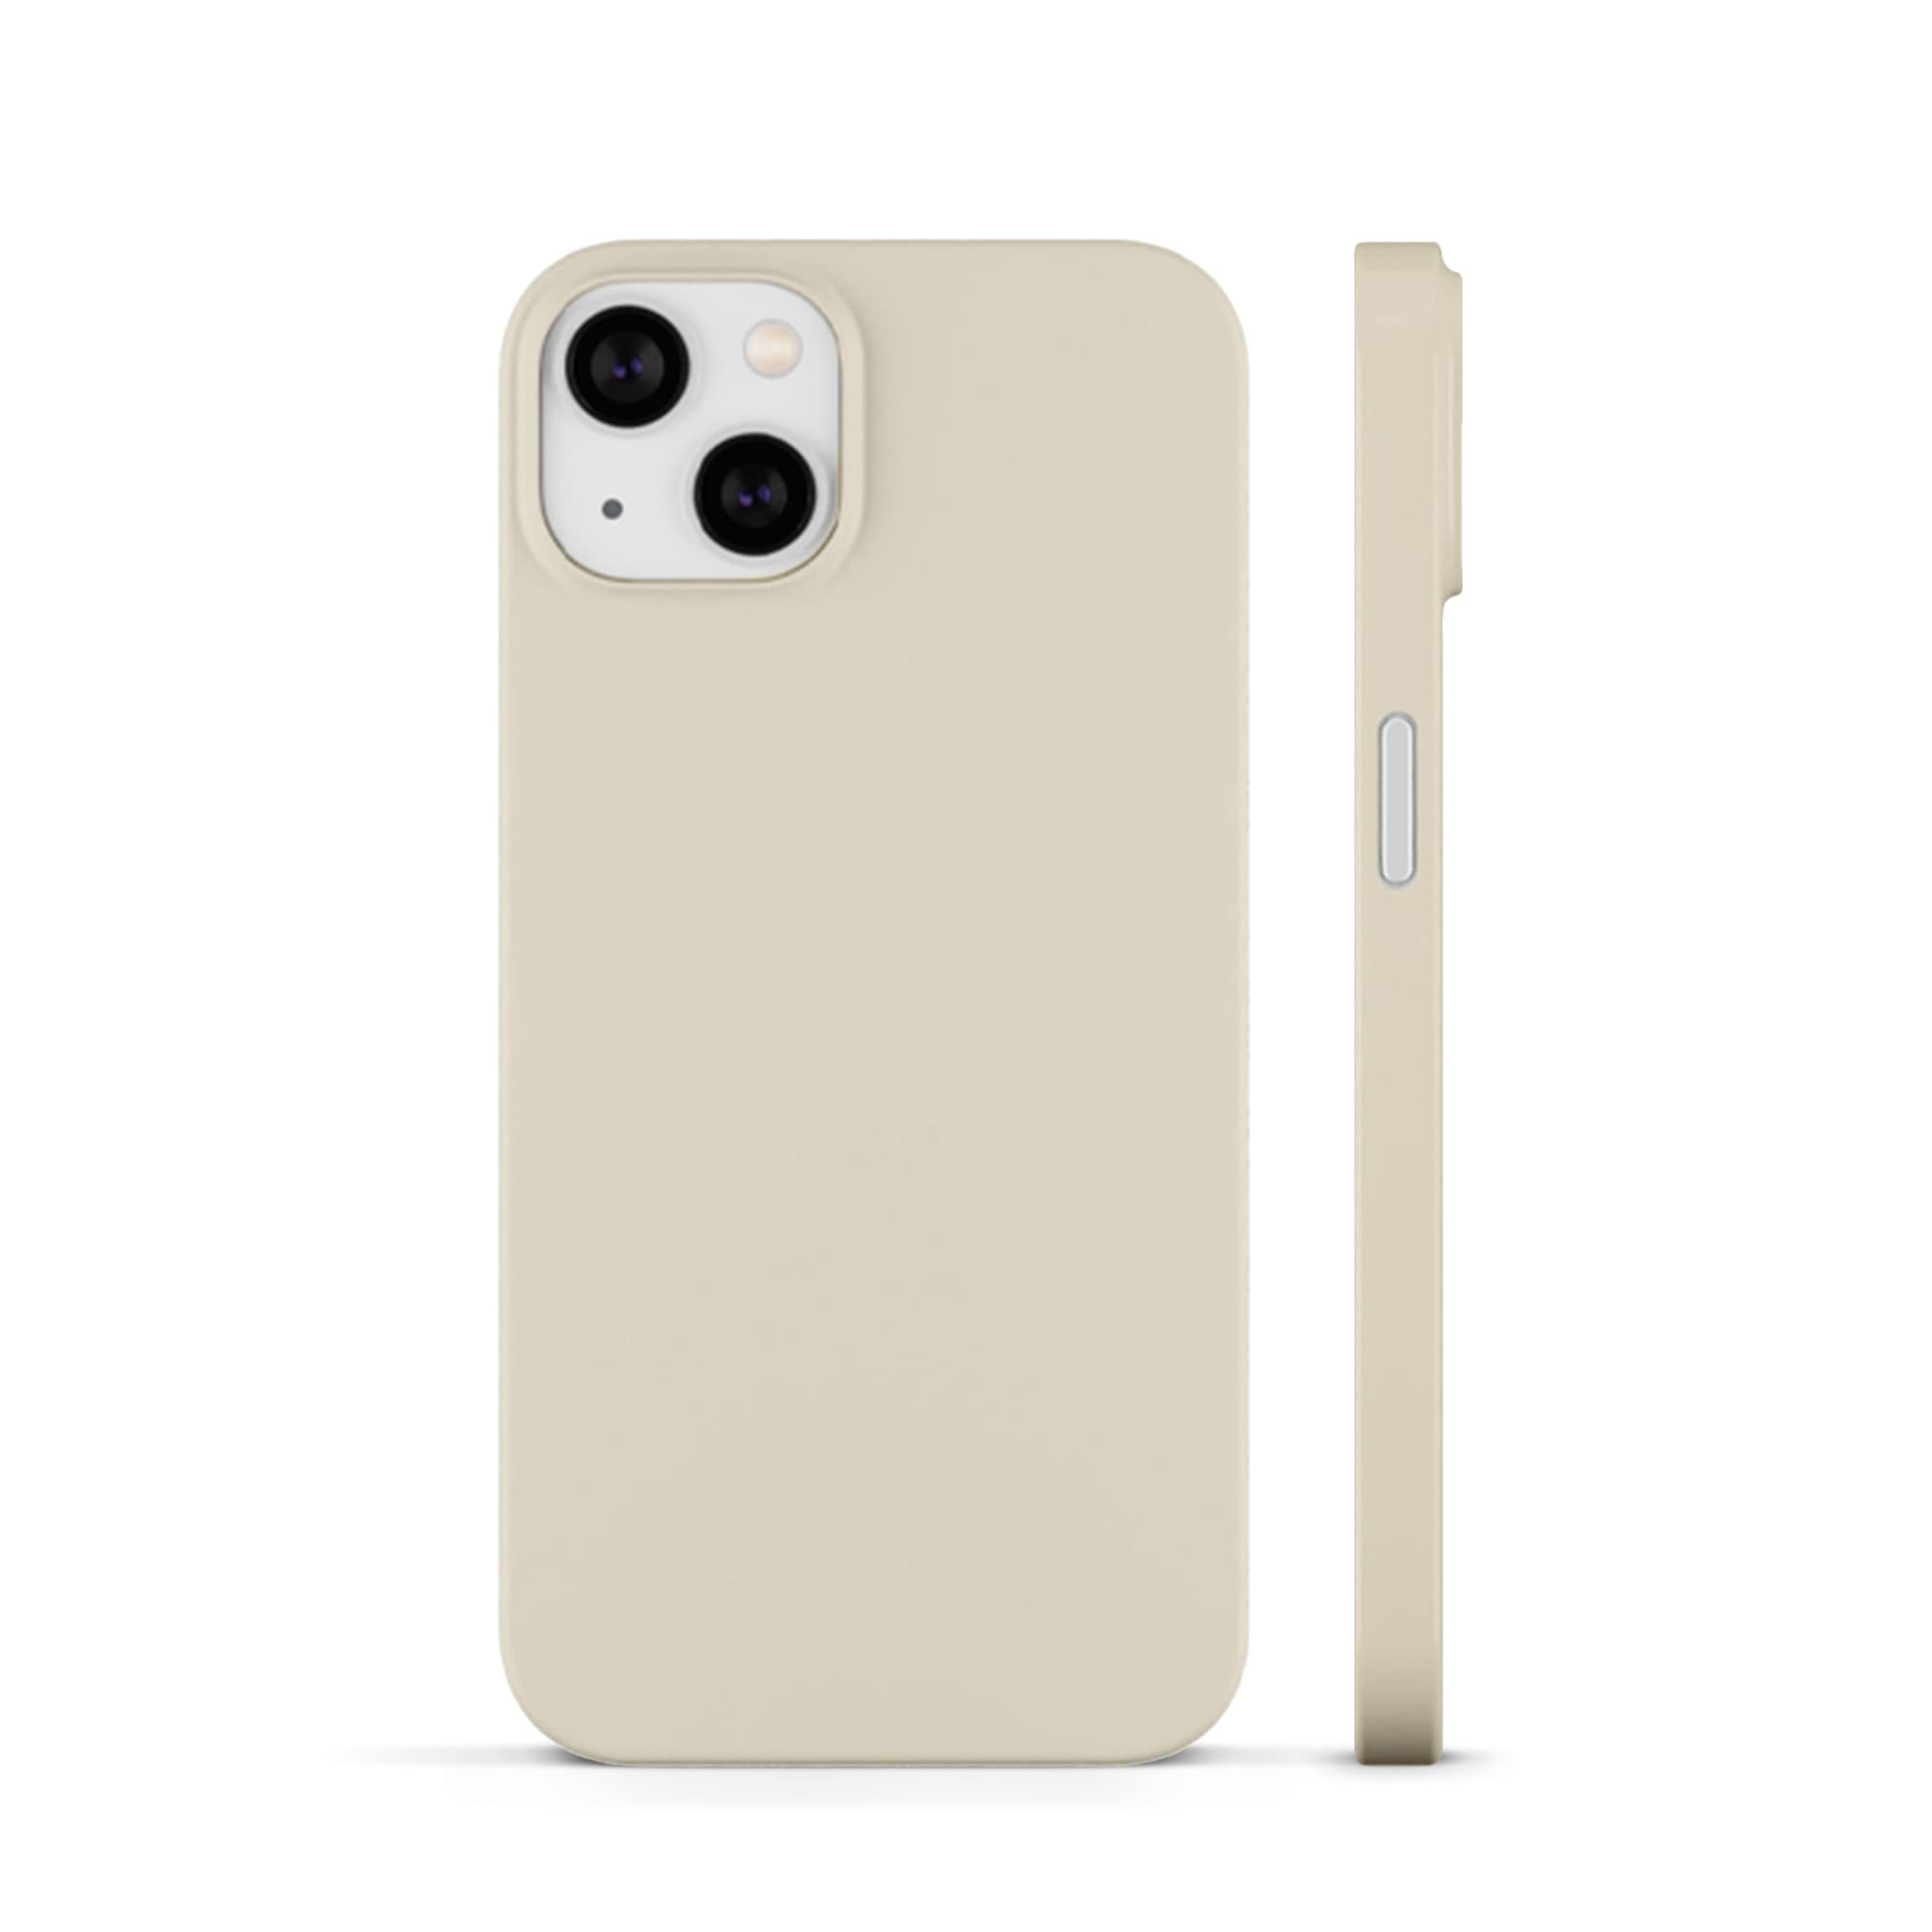 PEEL Ultra Thin iPhone 14 Case, Bone - Minimalist Design | Branding Free | Protects and Showcases Your Apple iPhone 14